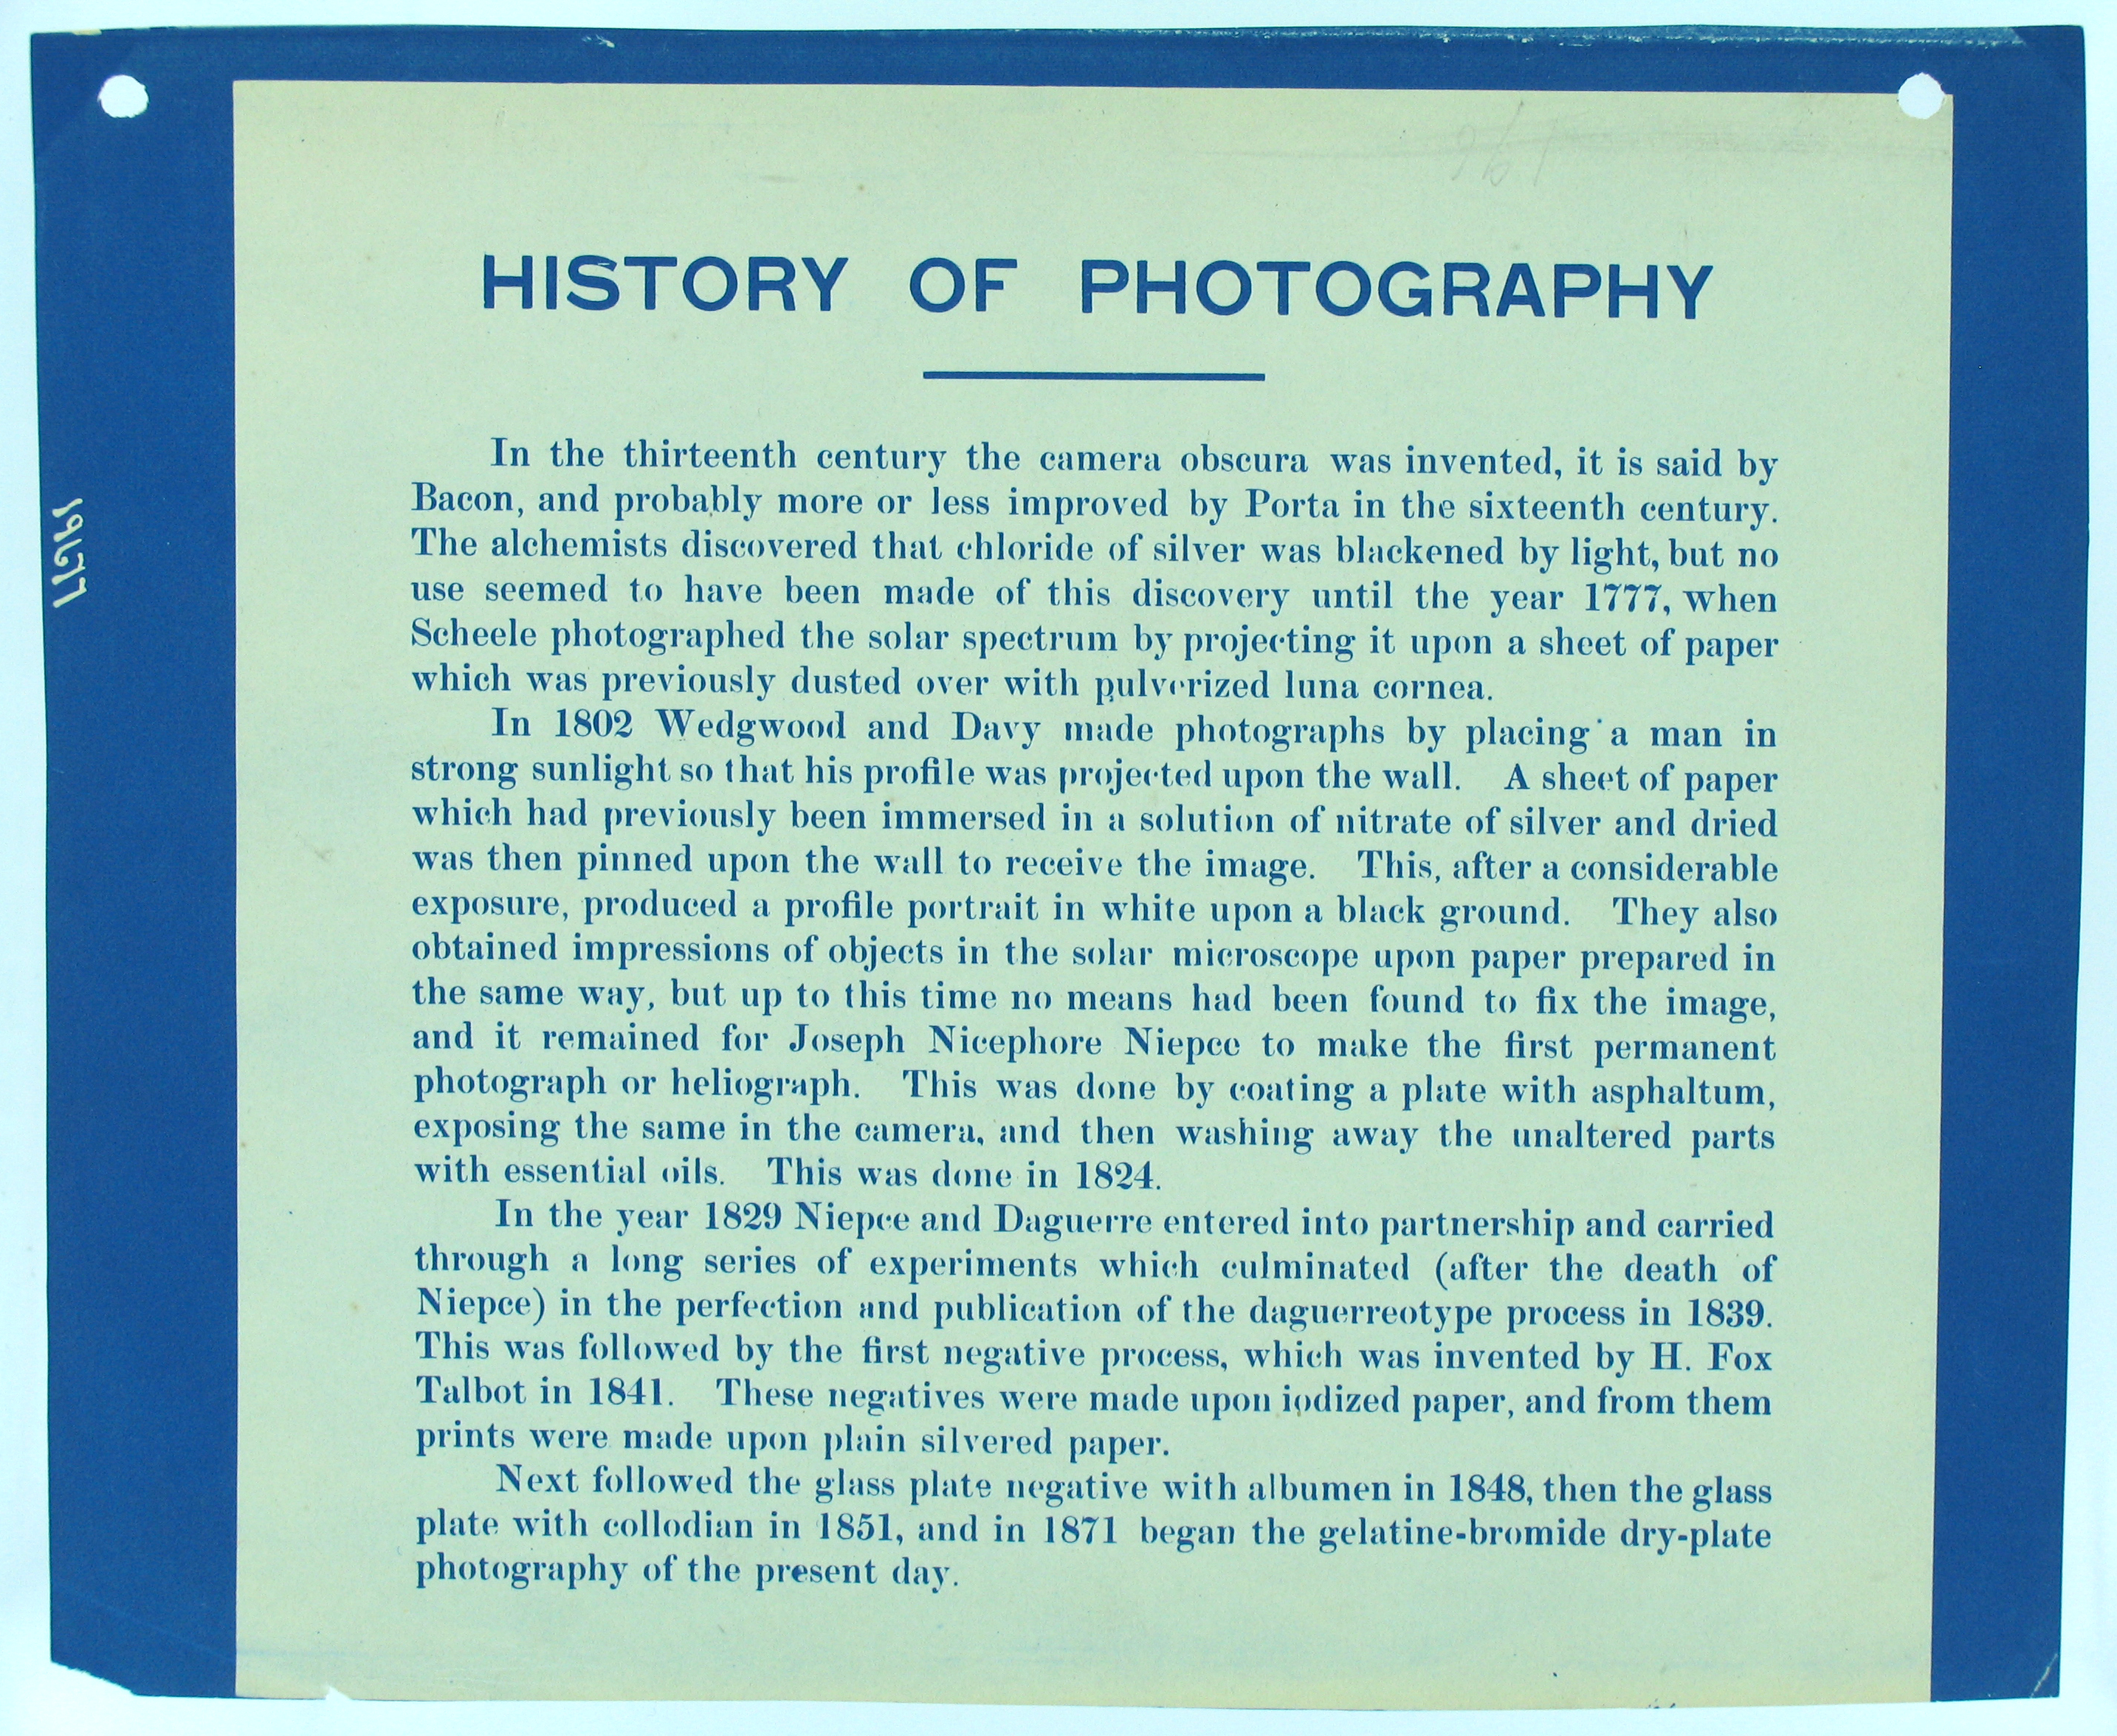 Description- Thomas Smillie was the Smithsonian's first photographer and curator of photography, beginning his career at the institution in the 1870s. In 1913 he mounted an exhibition on the history (2551356690)